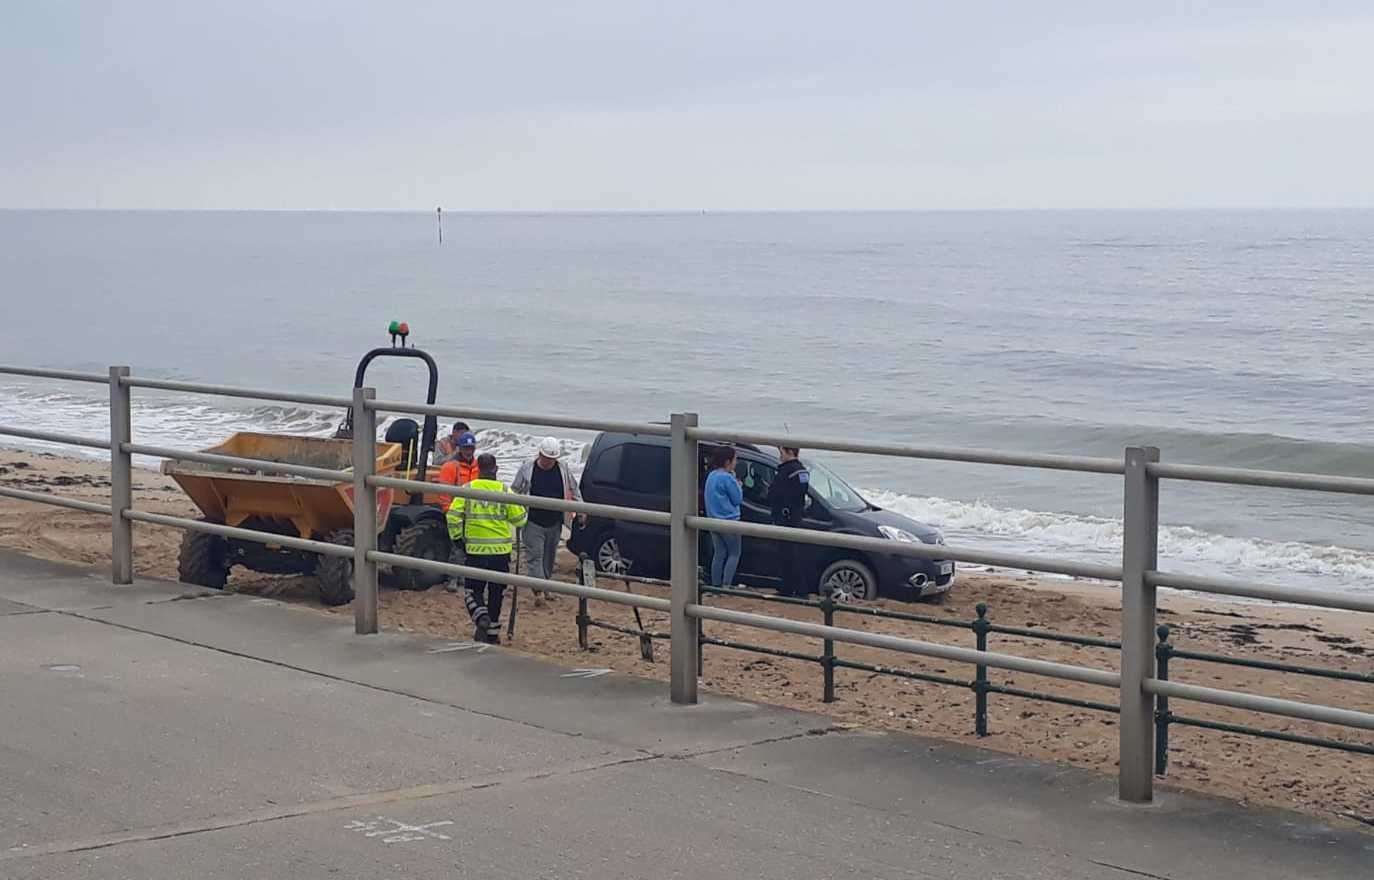 The car became stuck on Margate's Main Sands. Picture: Jodie Ellena